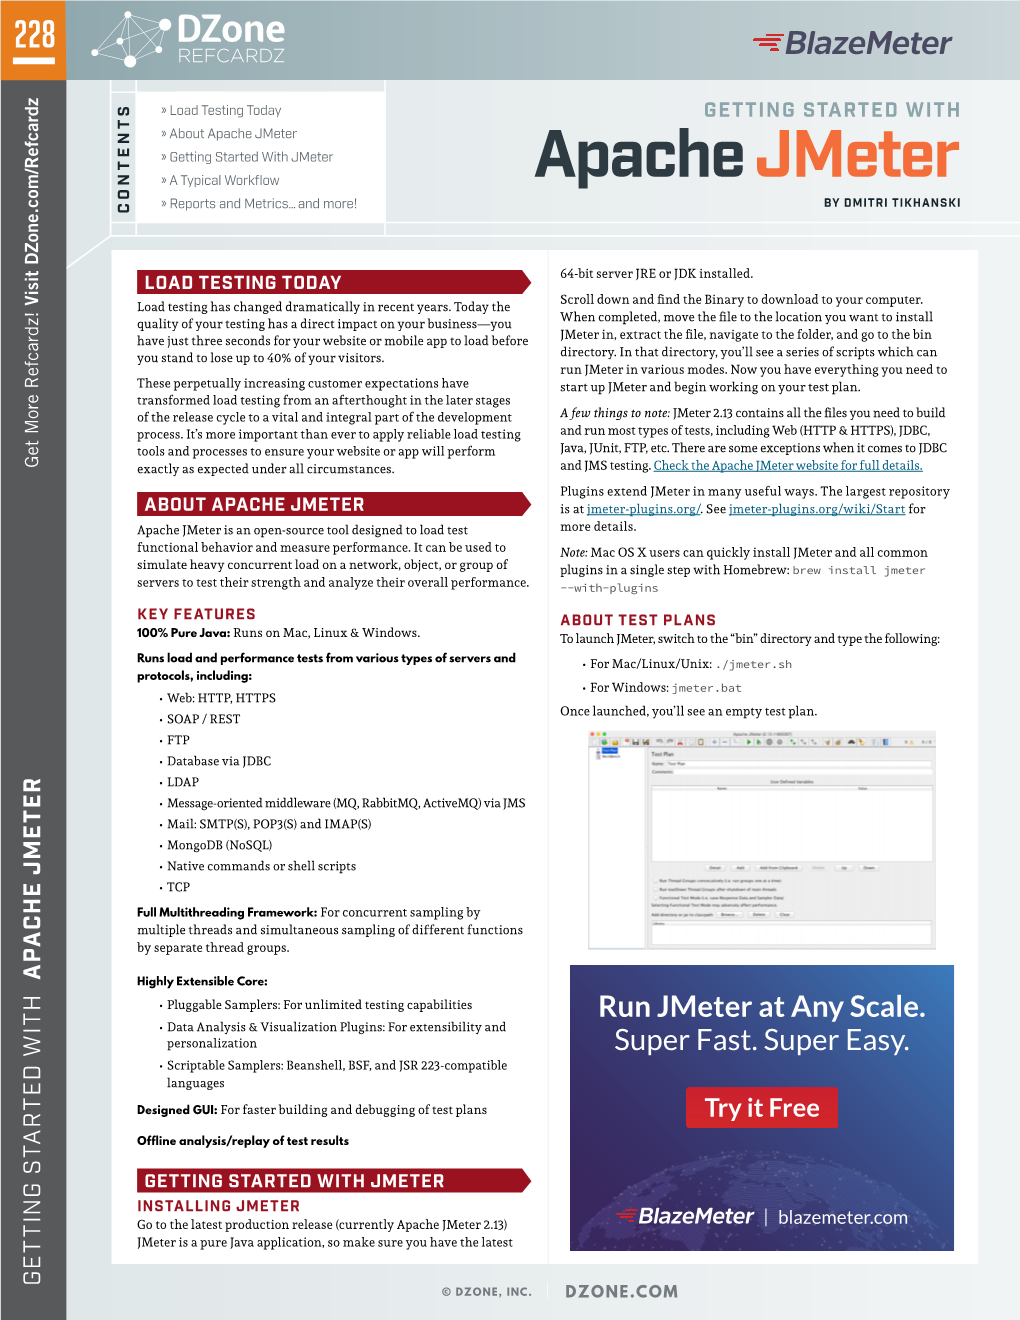 Apache Jmeter » Getting Started with Jmeter » a Typical Workflow Apache Jmeter » Reports and Metrics